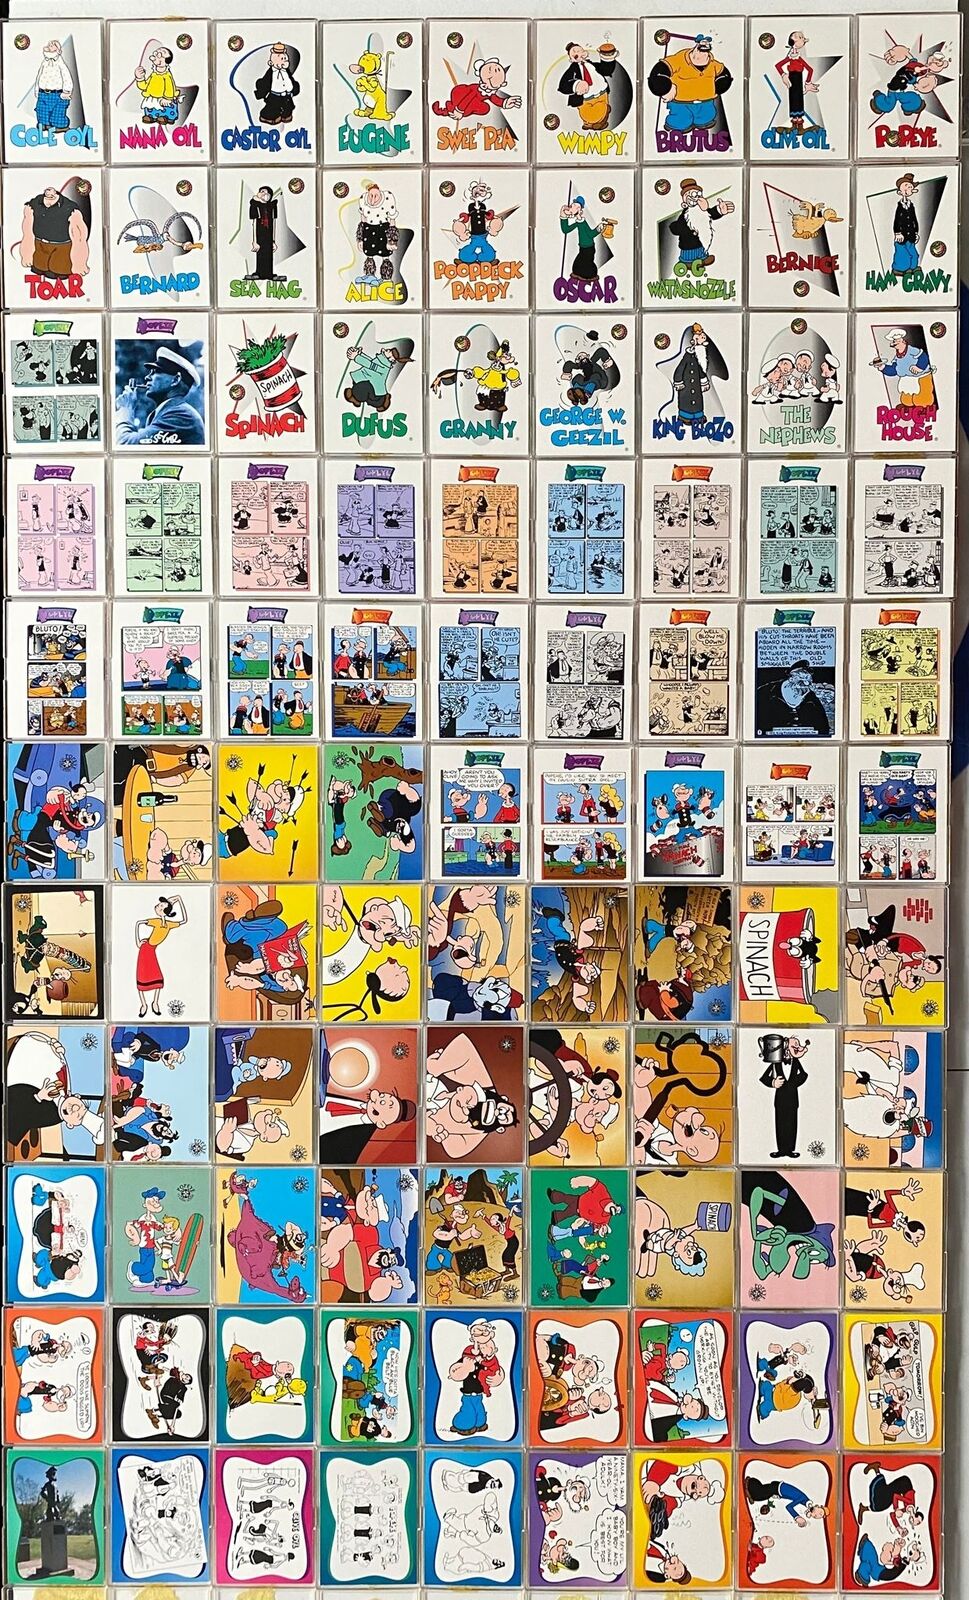 1994 Popeye 65th Anniversary Complete Trading Card Set 100 Cards Card Creations